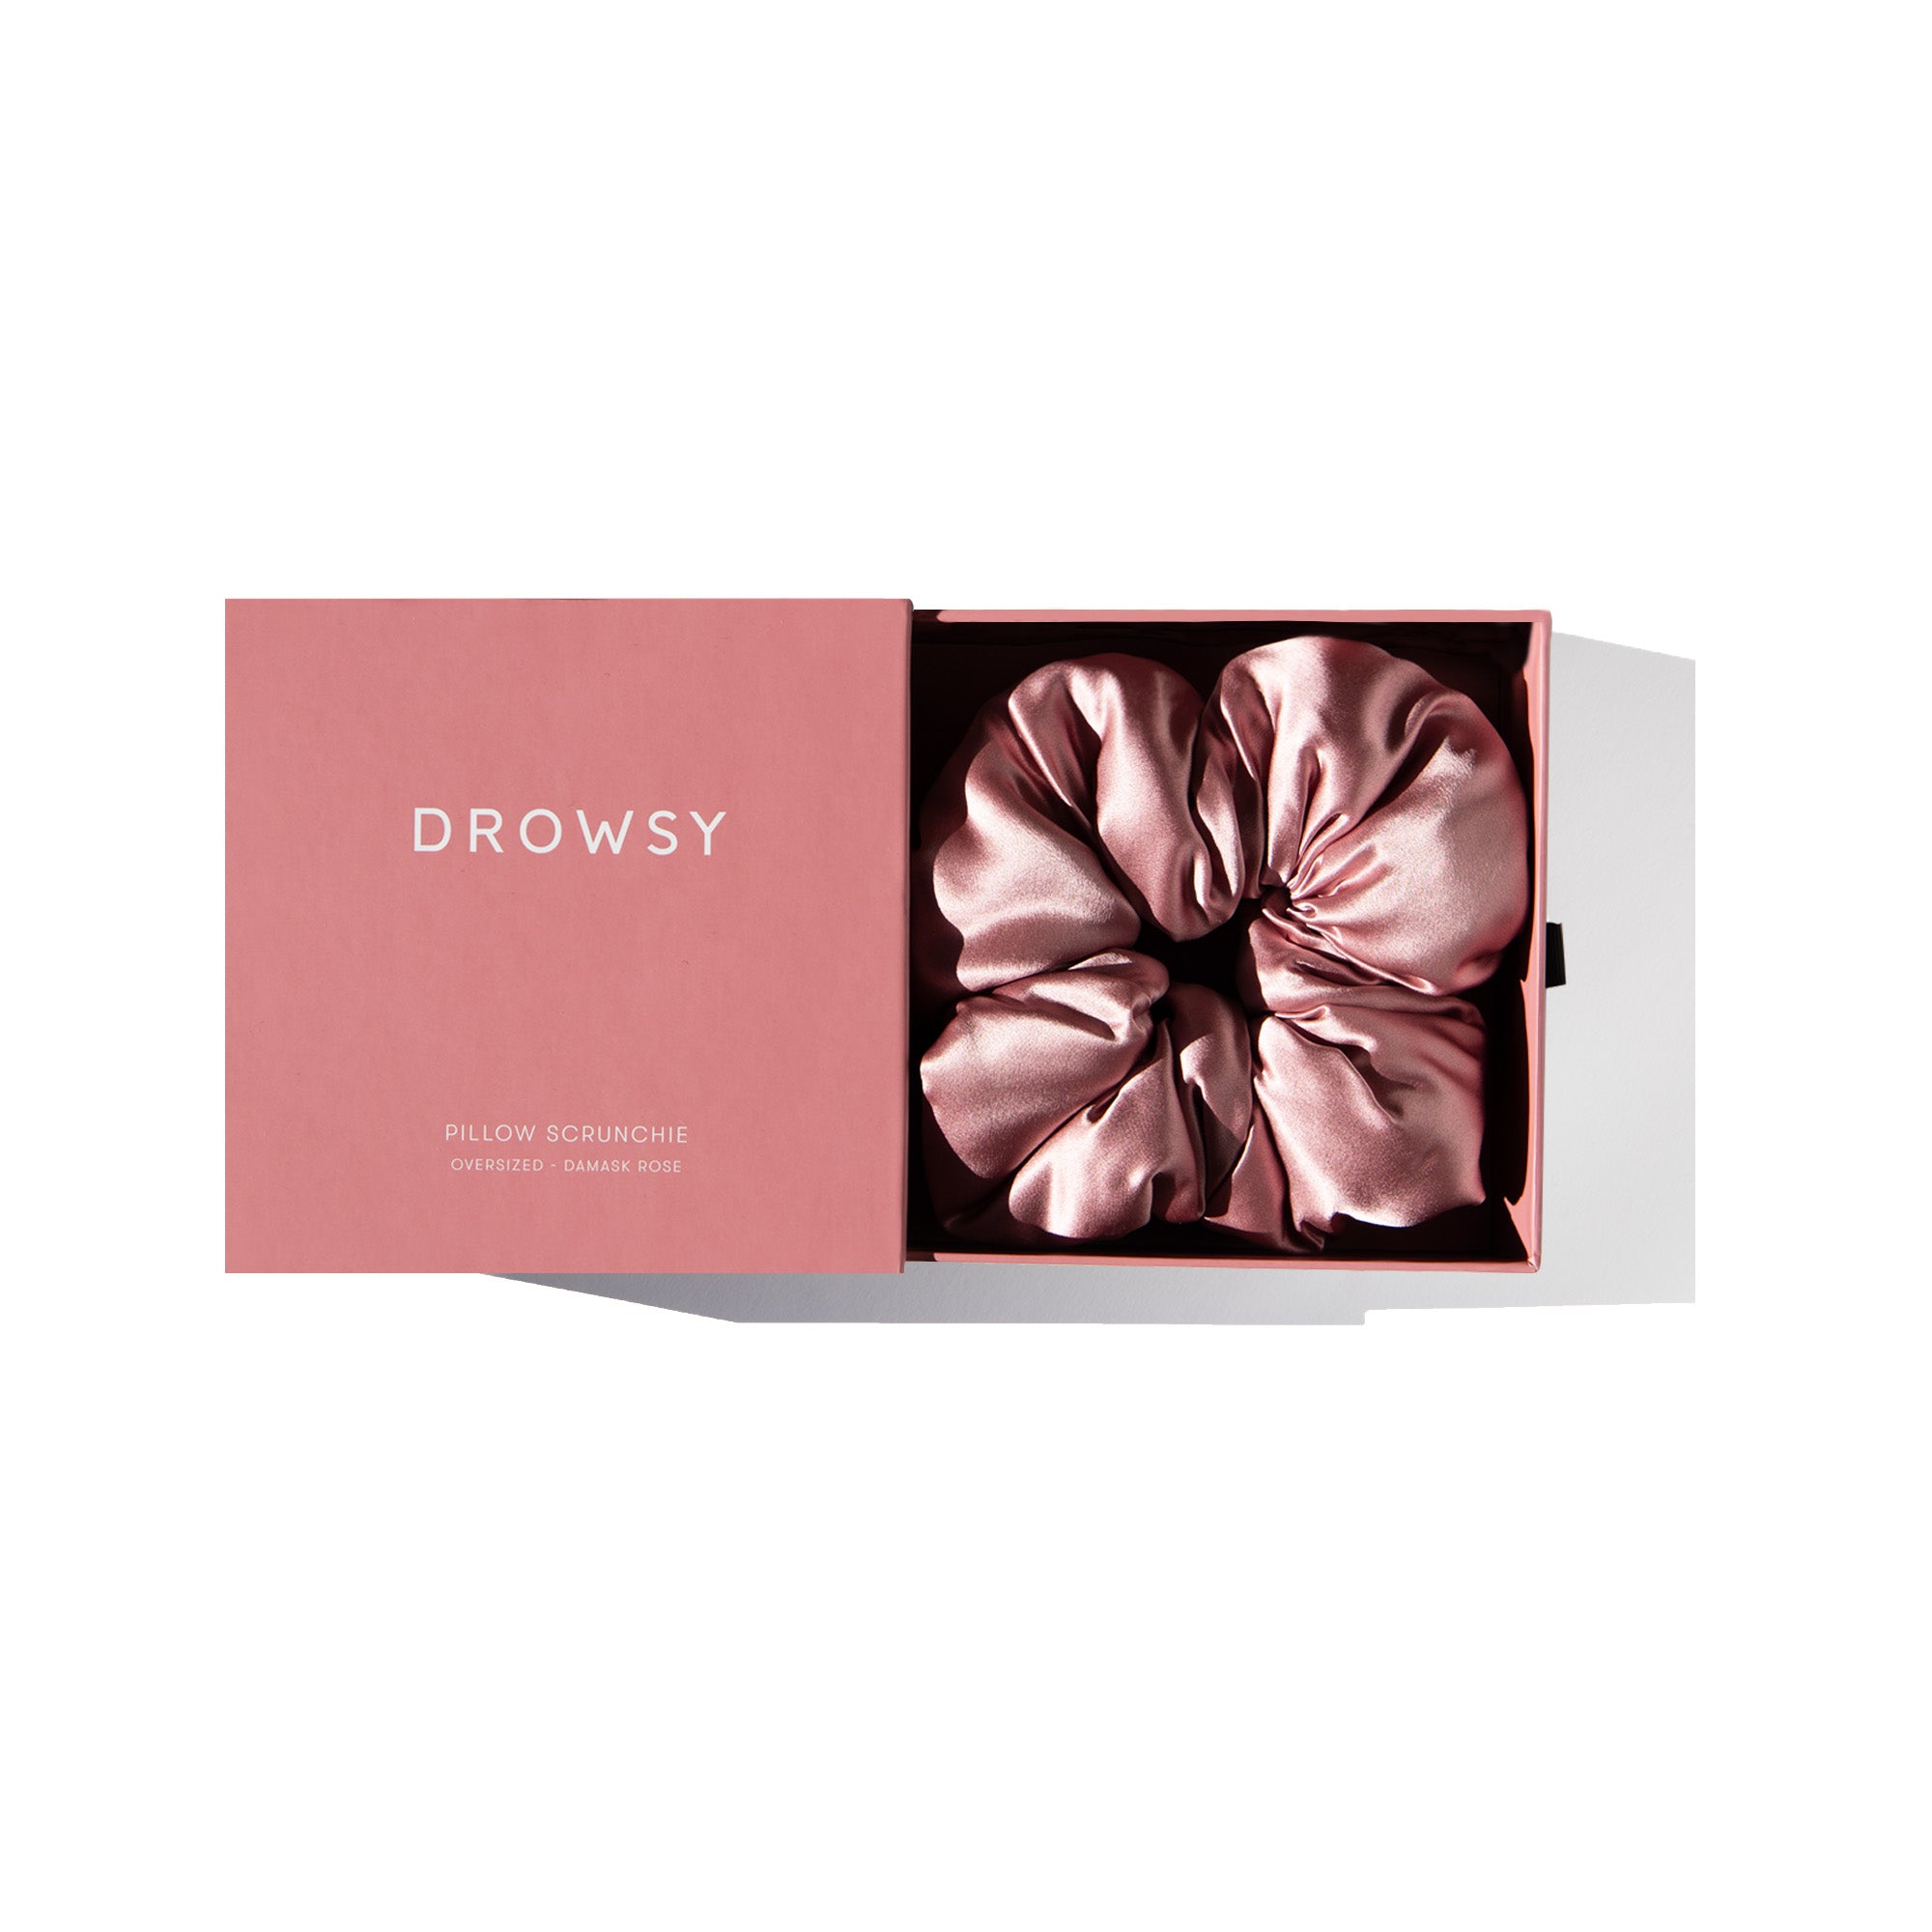 Drowsy Damask Rose Pillow Scrunchie in its box on a white background